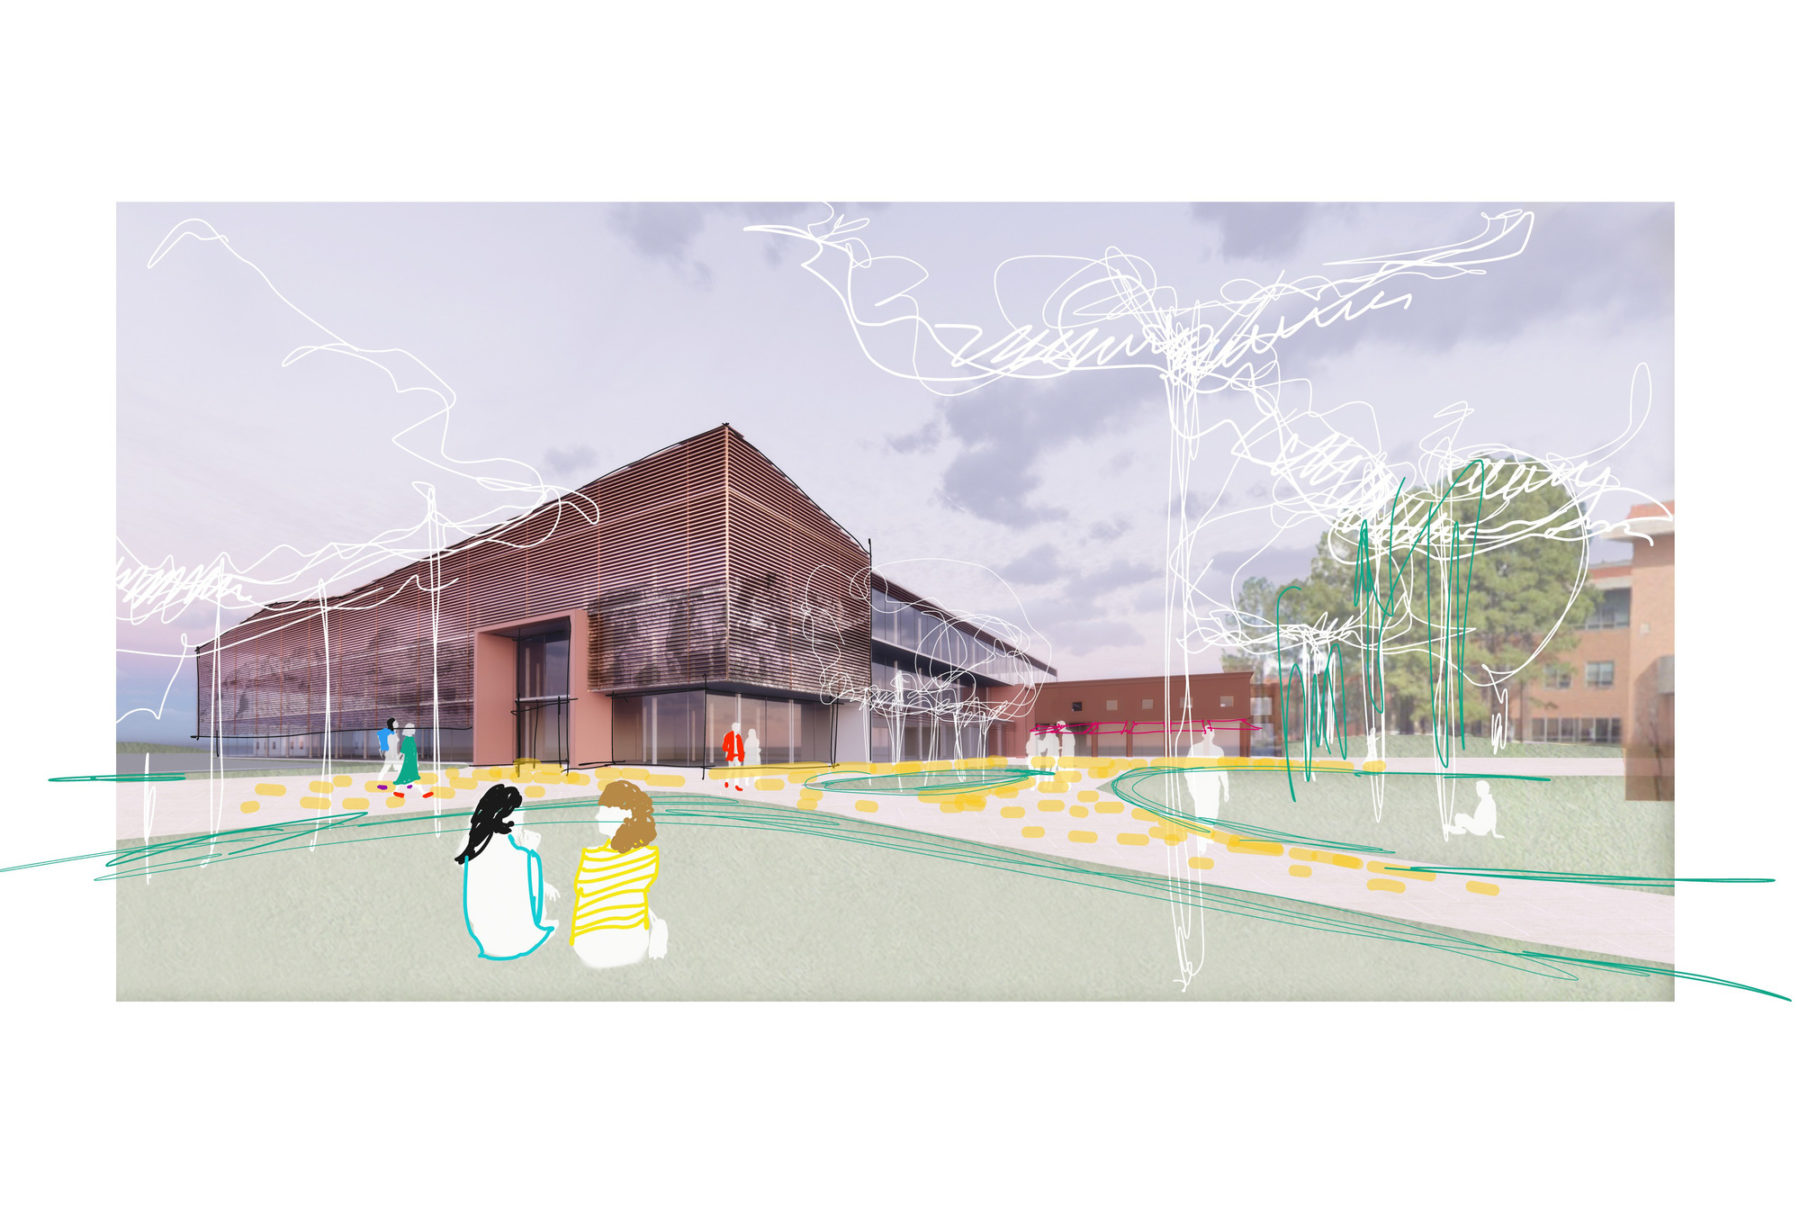 conceptual rendering of the west building entry - two students sit on the grass in the foreground